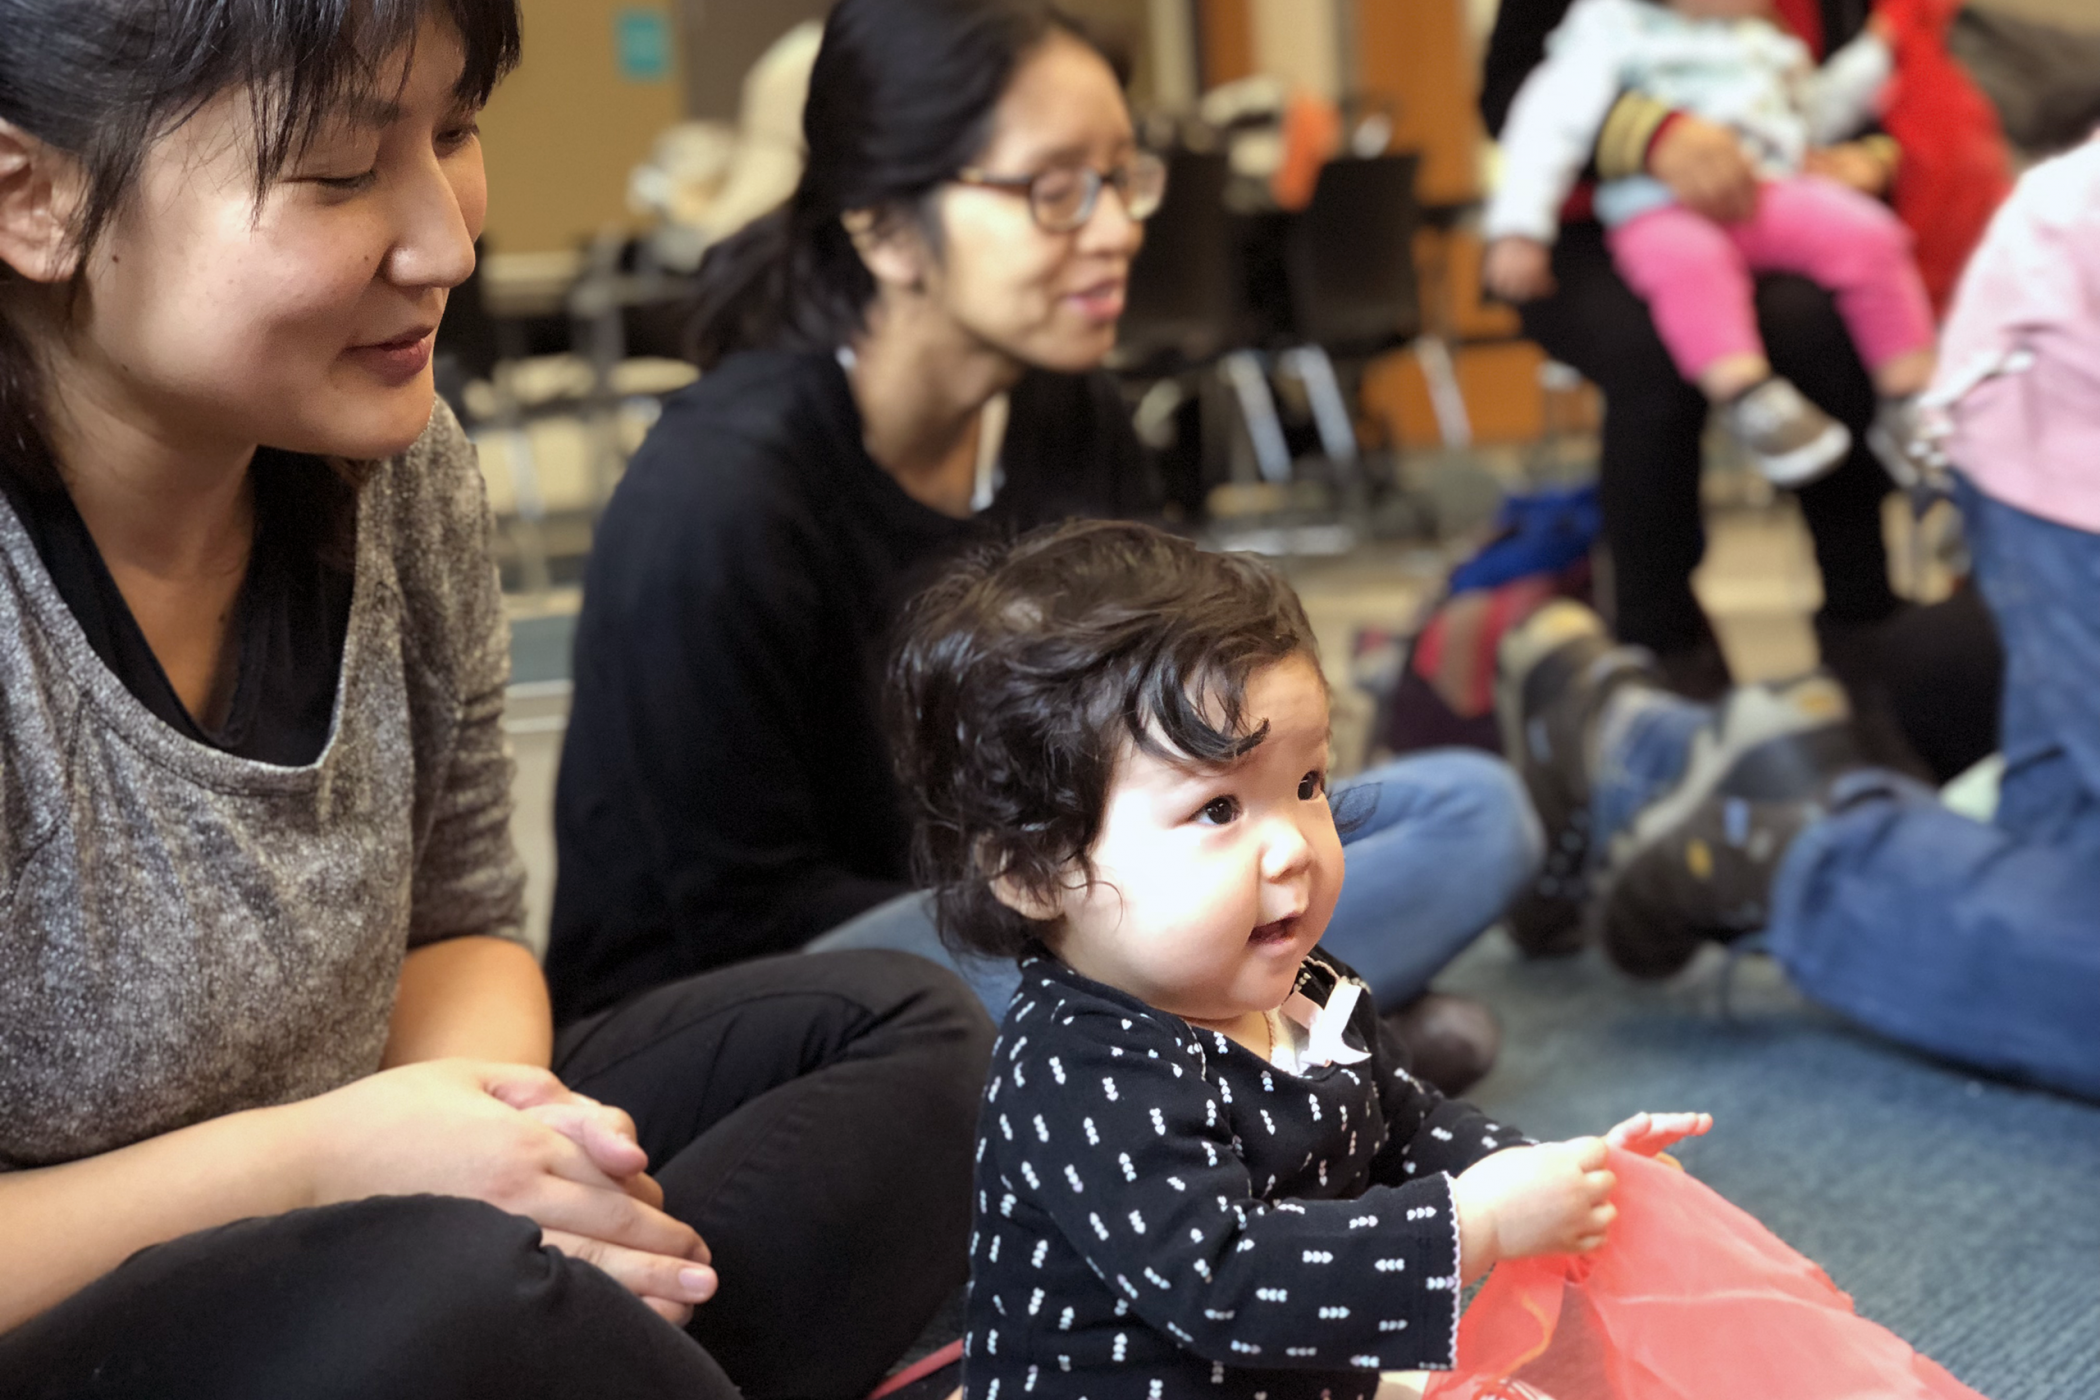 An Asian baby sits on the floor smiling with caregivers and other adults around her